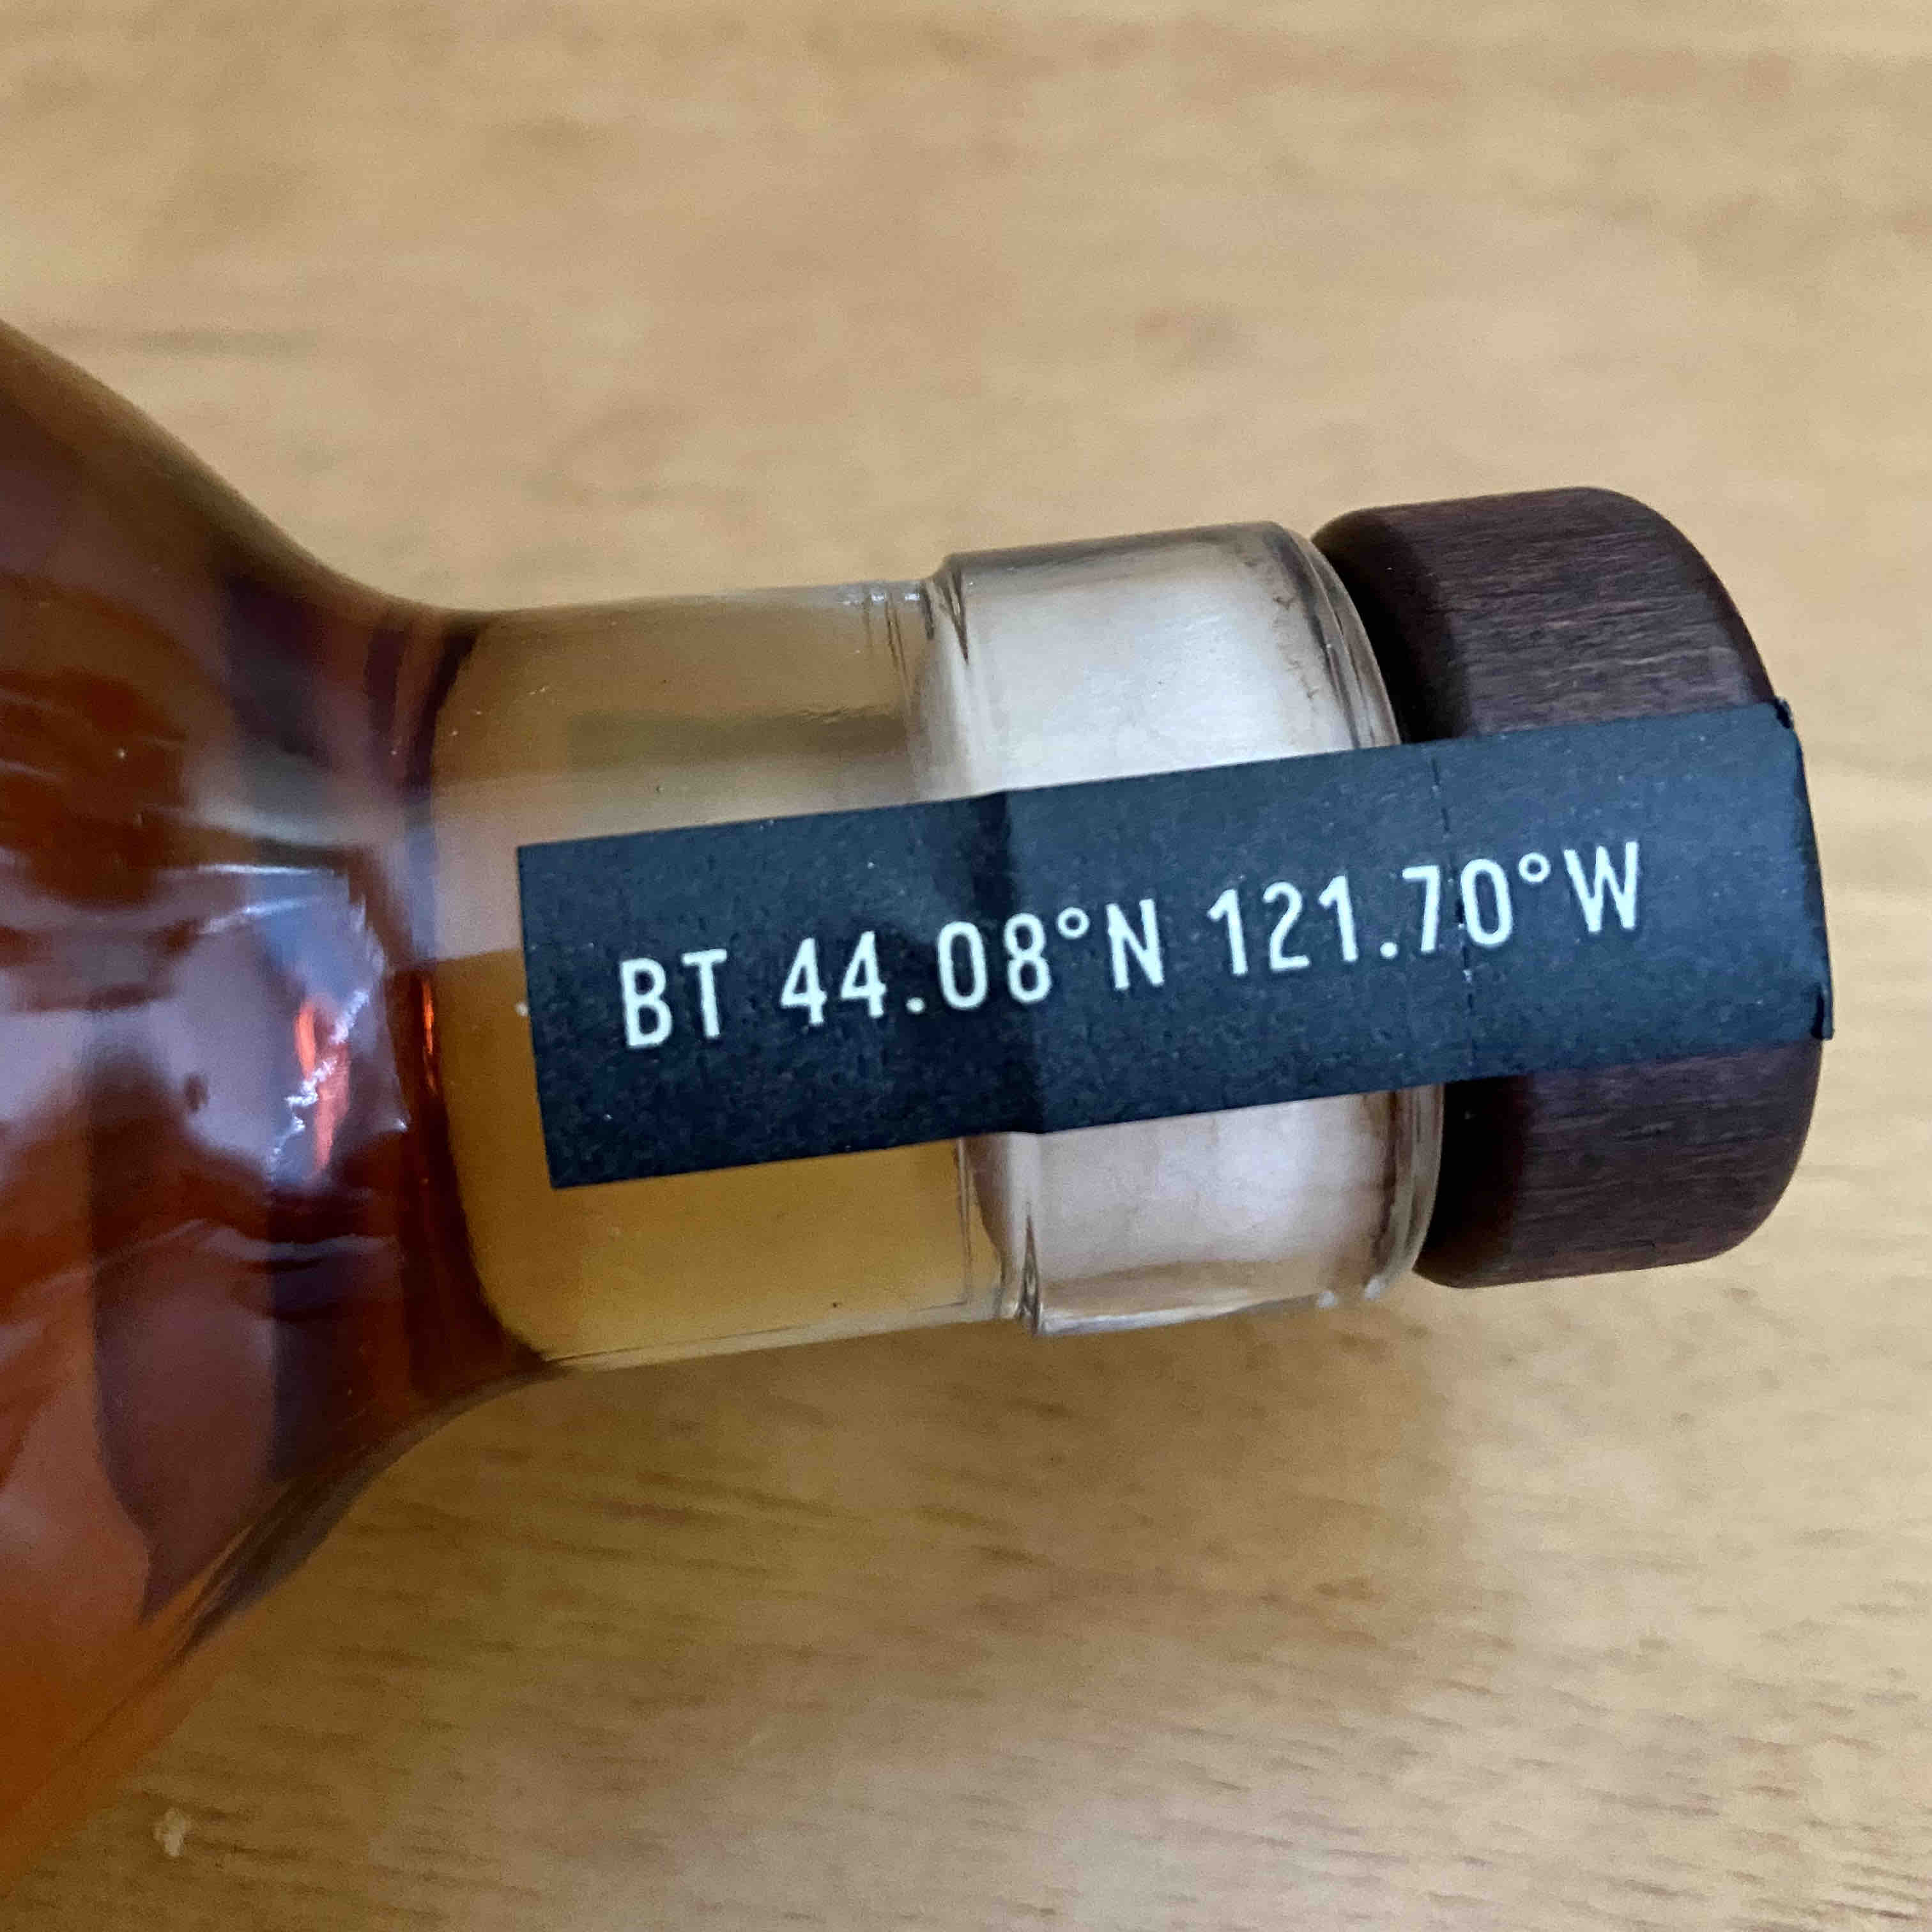 The coordinates of 44.08°N 121.70°W on the bottle cap tape of Broken Top Straight Rye Whiskey lead to Broken Top outside of Sisters, Oregon.